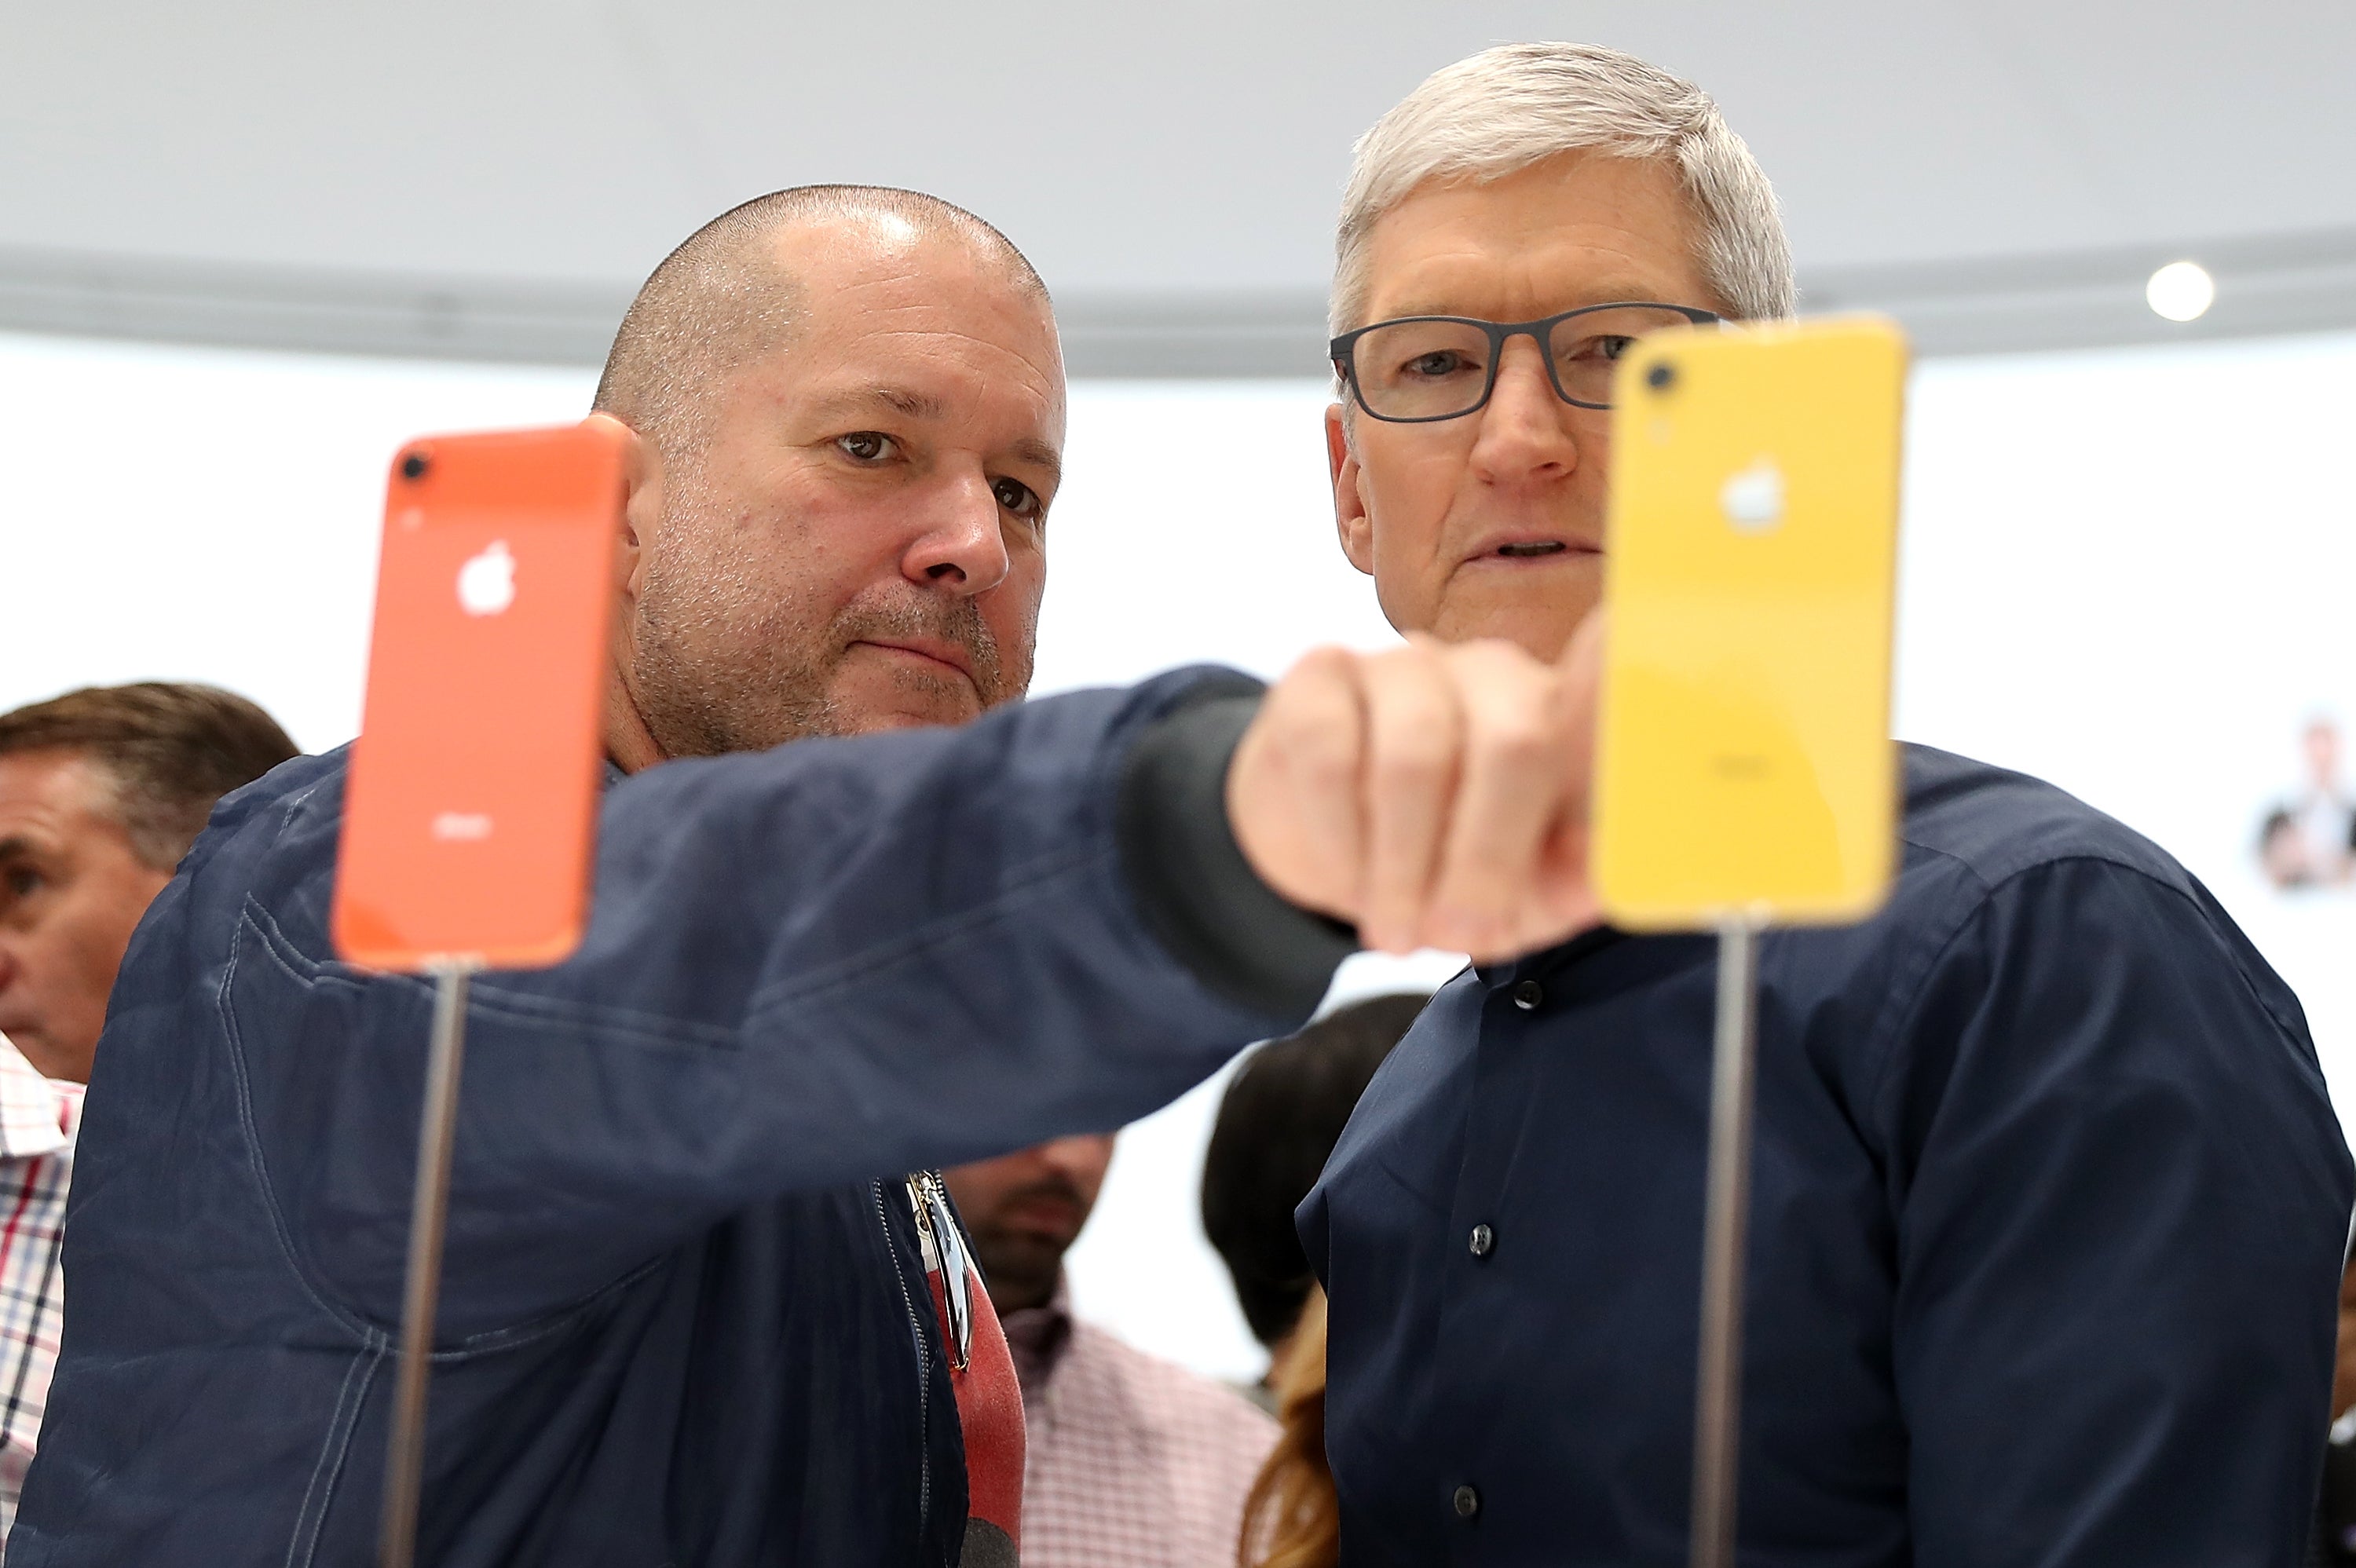 Jony Ive, Apple’s most famous designer, is rumoured to be working on a new AI-focused device. Meanwhile Tim Cook and Apple are adding new AI features to the actual iPhone